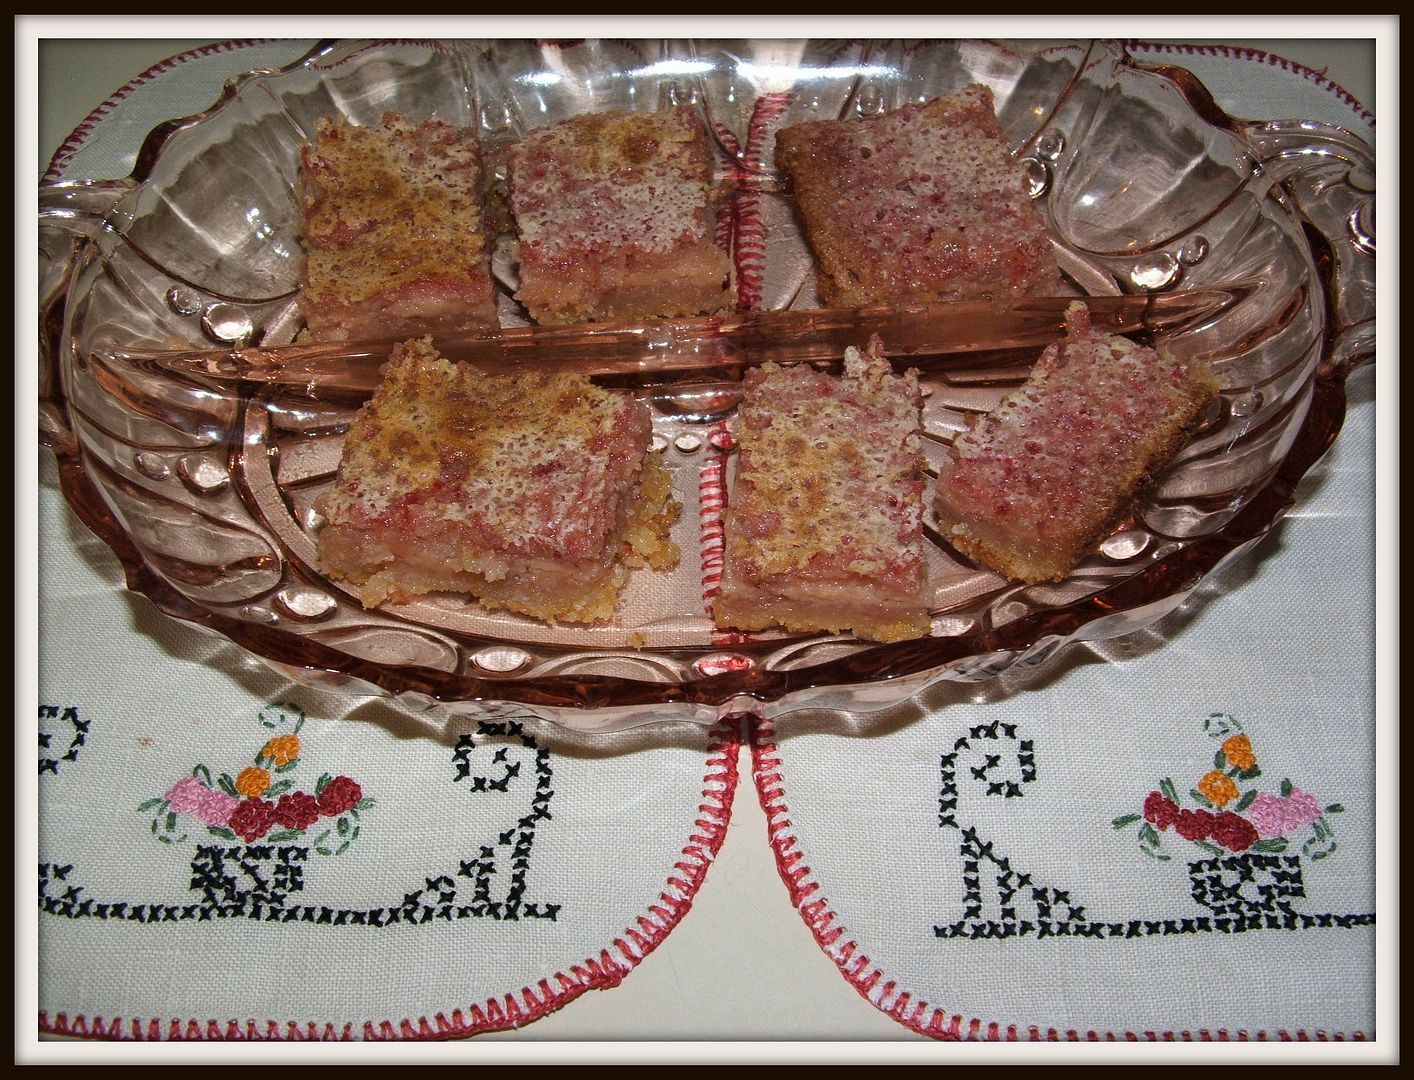 Strawberry Lemon Coconut Squares by Angie Ouellette-Tower for godsgrowinggarden.com photo 008_zpsa54aaf54.jpg